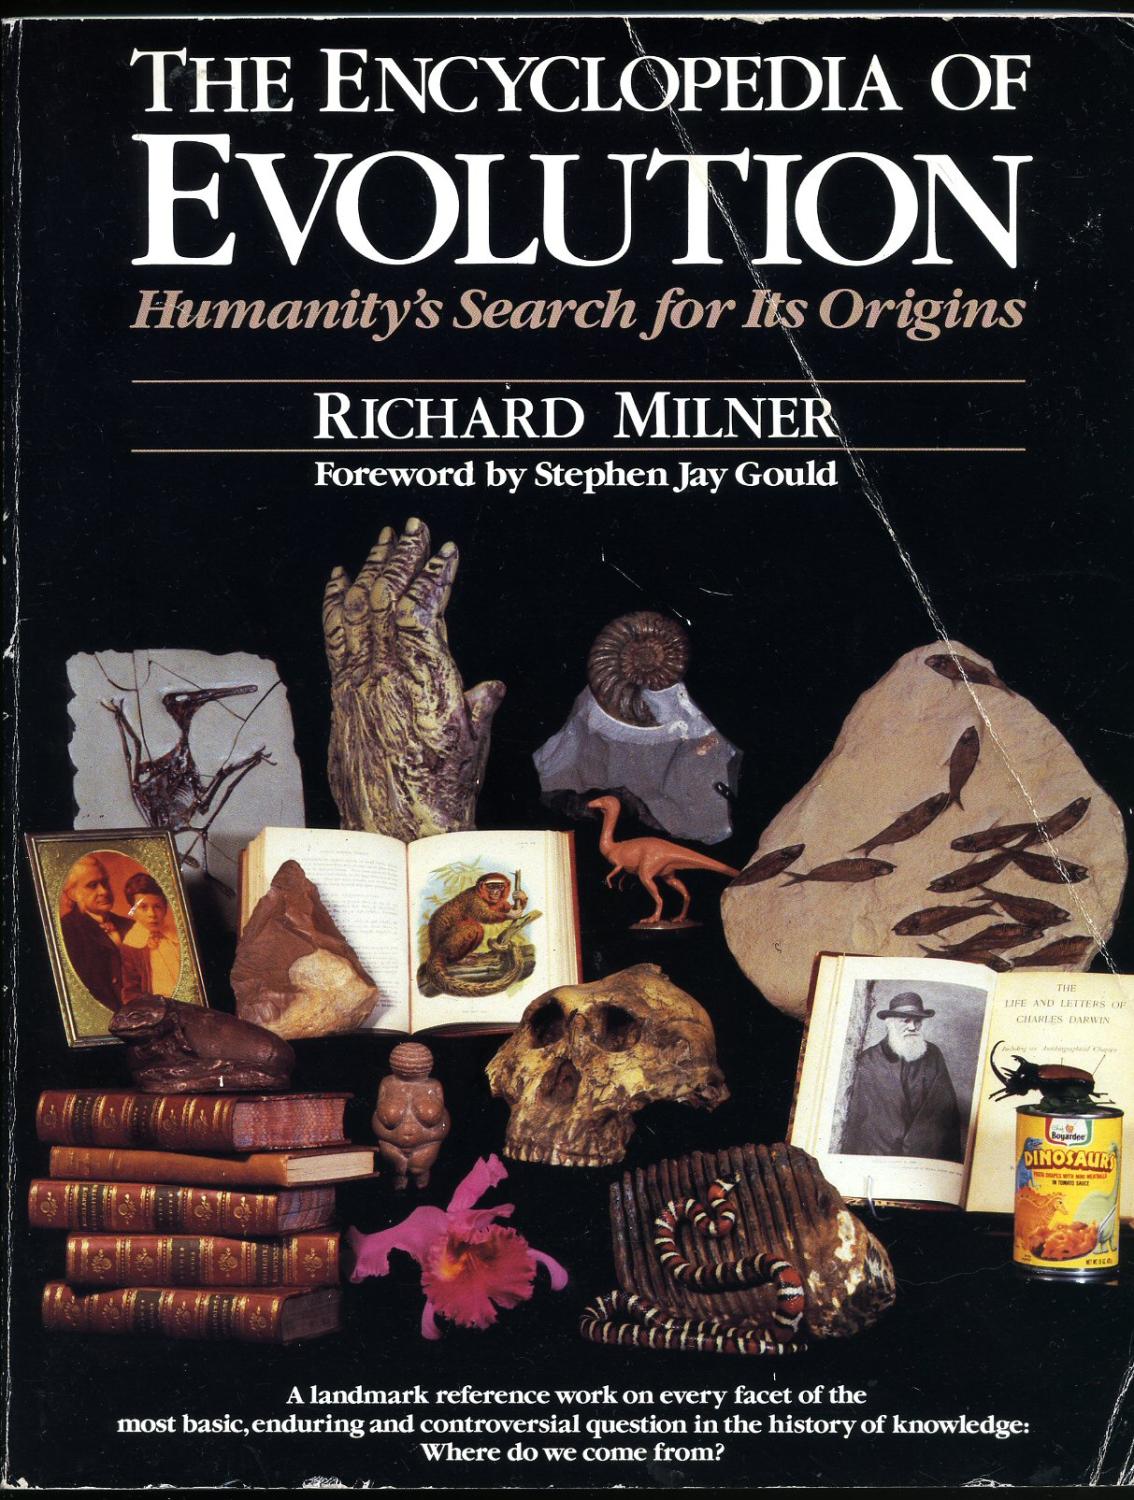 The Encyclopedia of Evolution Humanity's Search for its Origins - Milner, Richard [Foreword by Stephen Jay Gould]